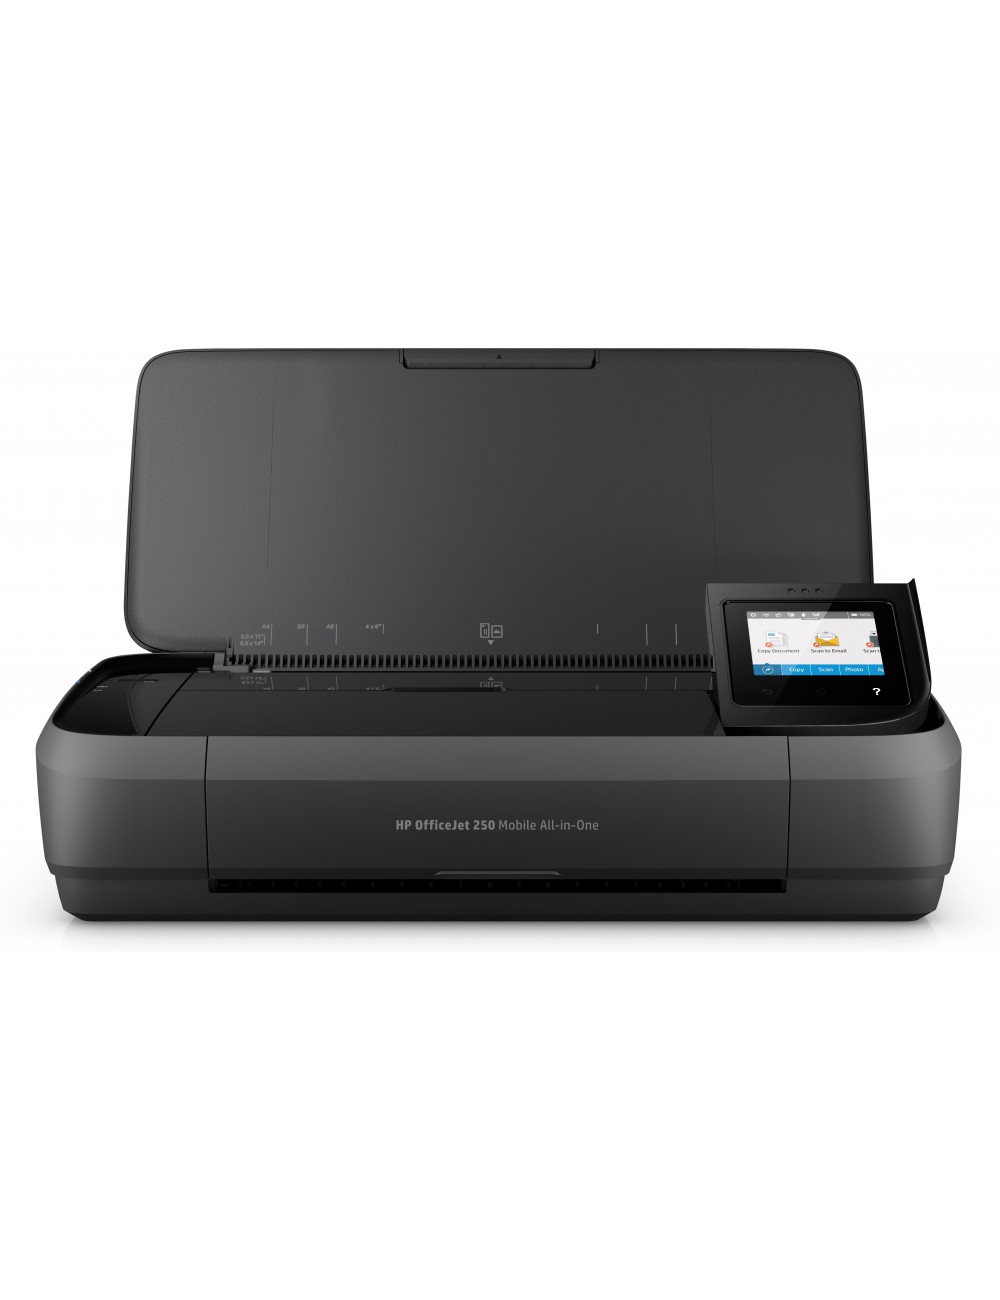 HP OfficeJet 250 Mobile Wireless All-in-One Colore Stampante, Fotocopiatrice, scanner